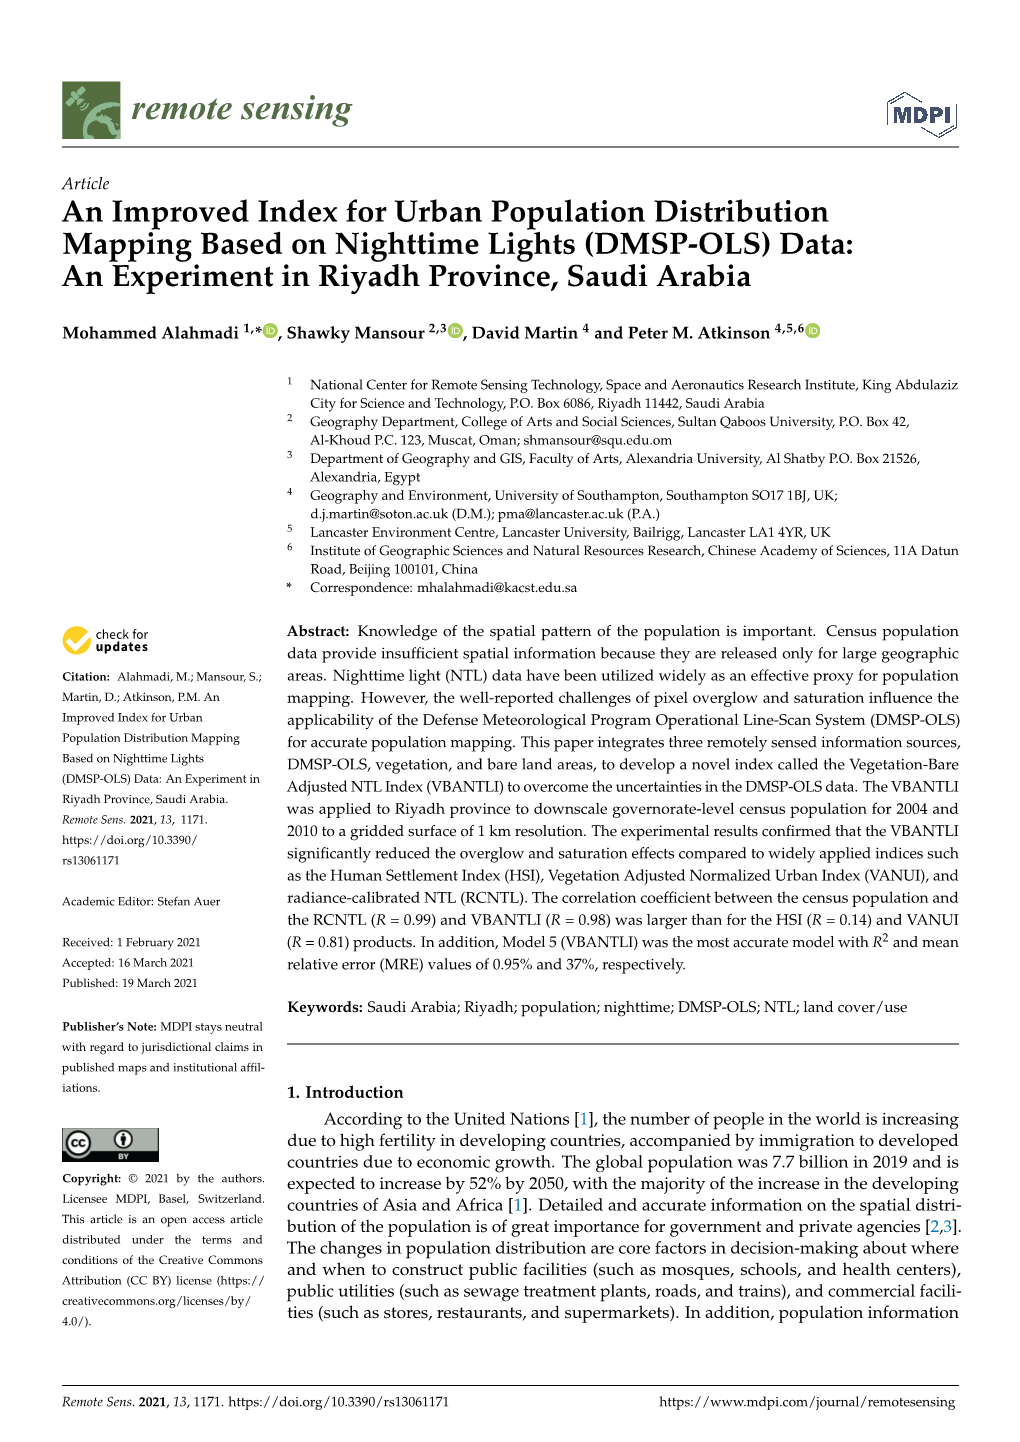 An Improved Index for Urban Population Distribution Mapping Based on Nighttime Lights (DMSP-OLS) Data: an Experiment in Riyadh Province, Saudi Arabia